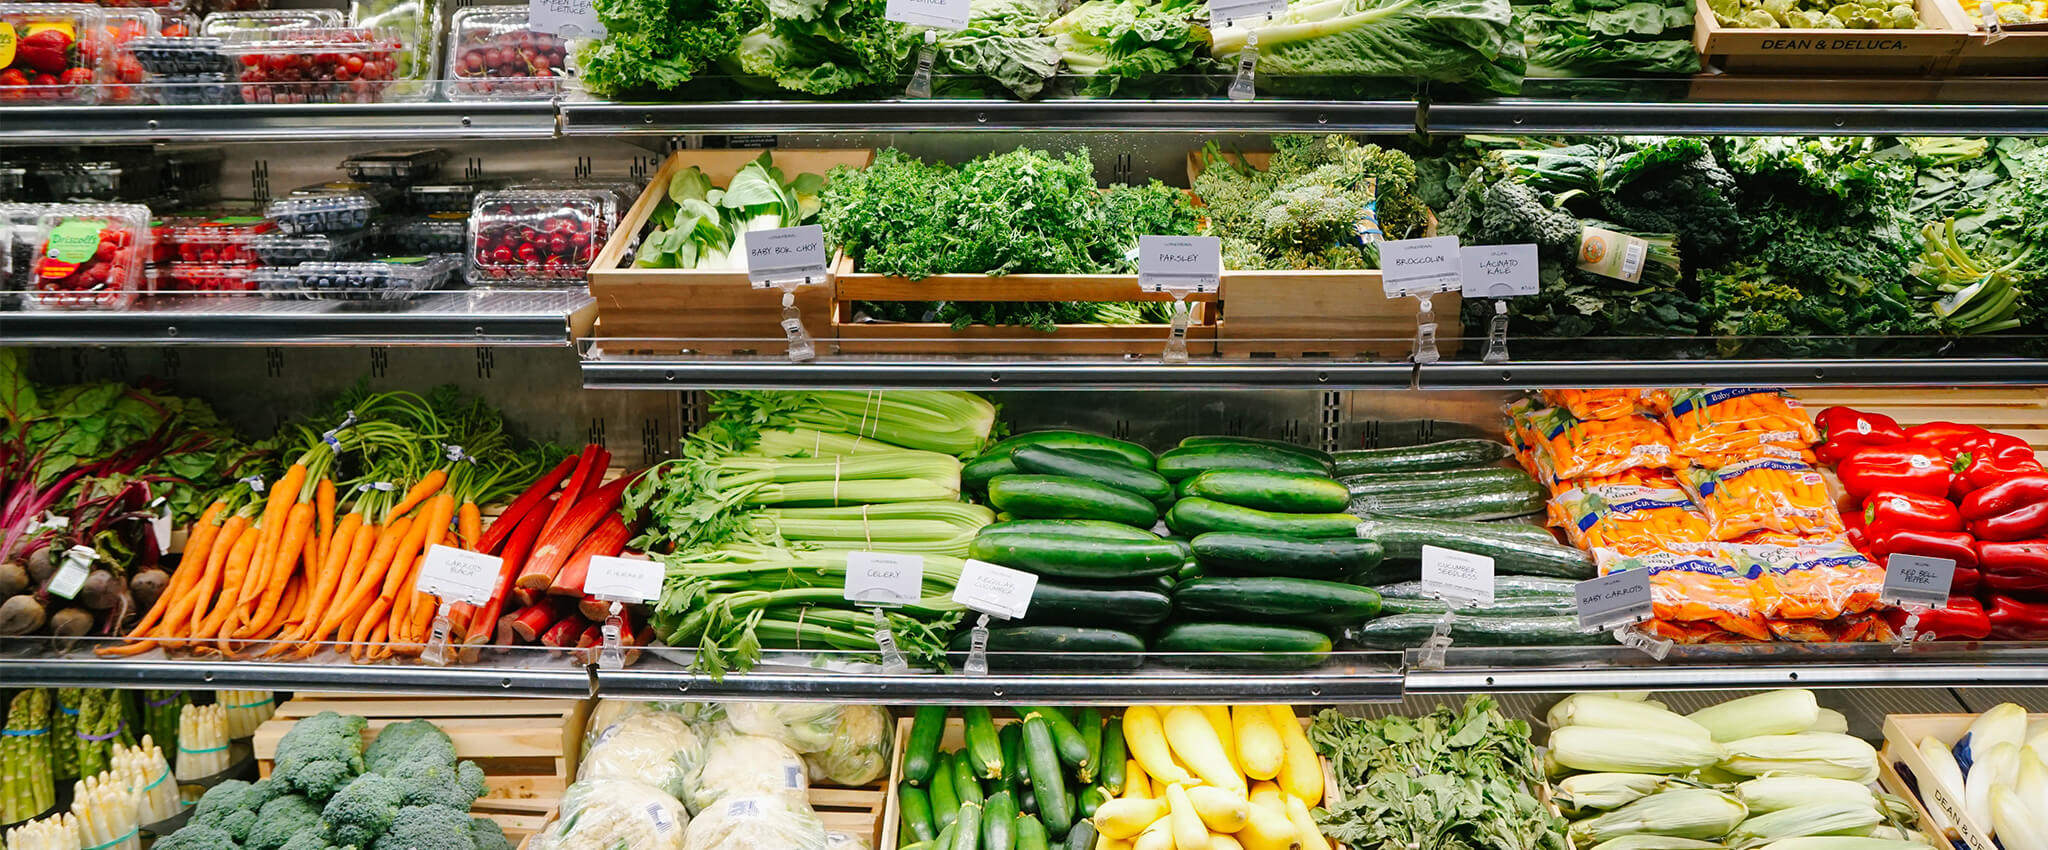 How The Produce Section Sets The Tone - Retail Space Solutions